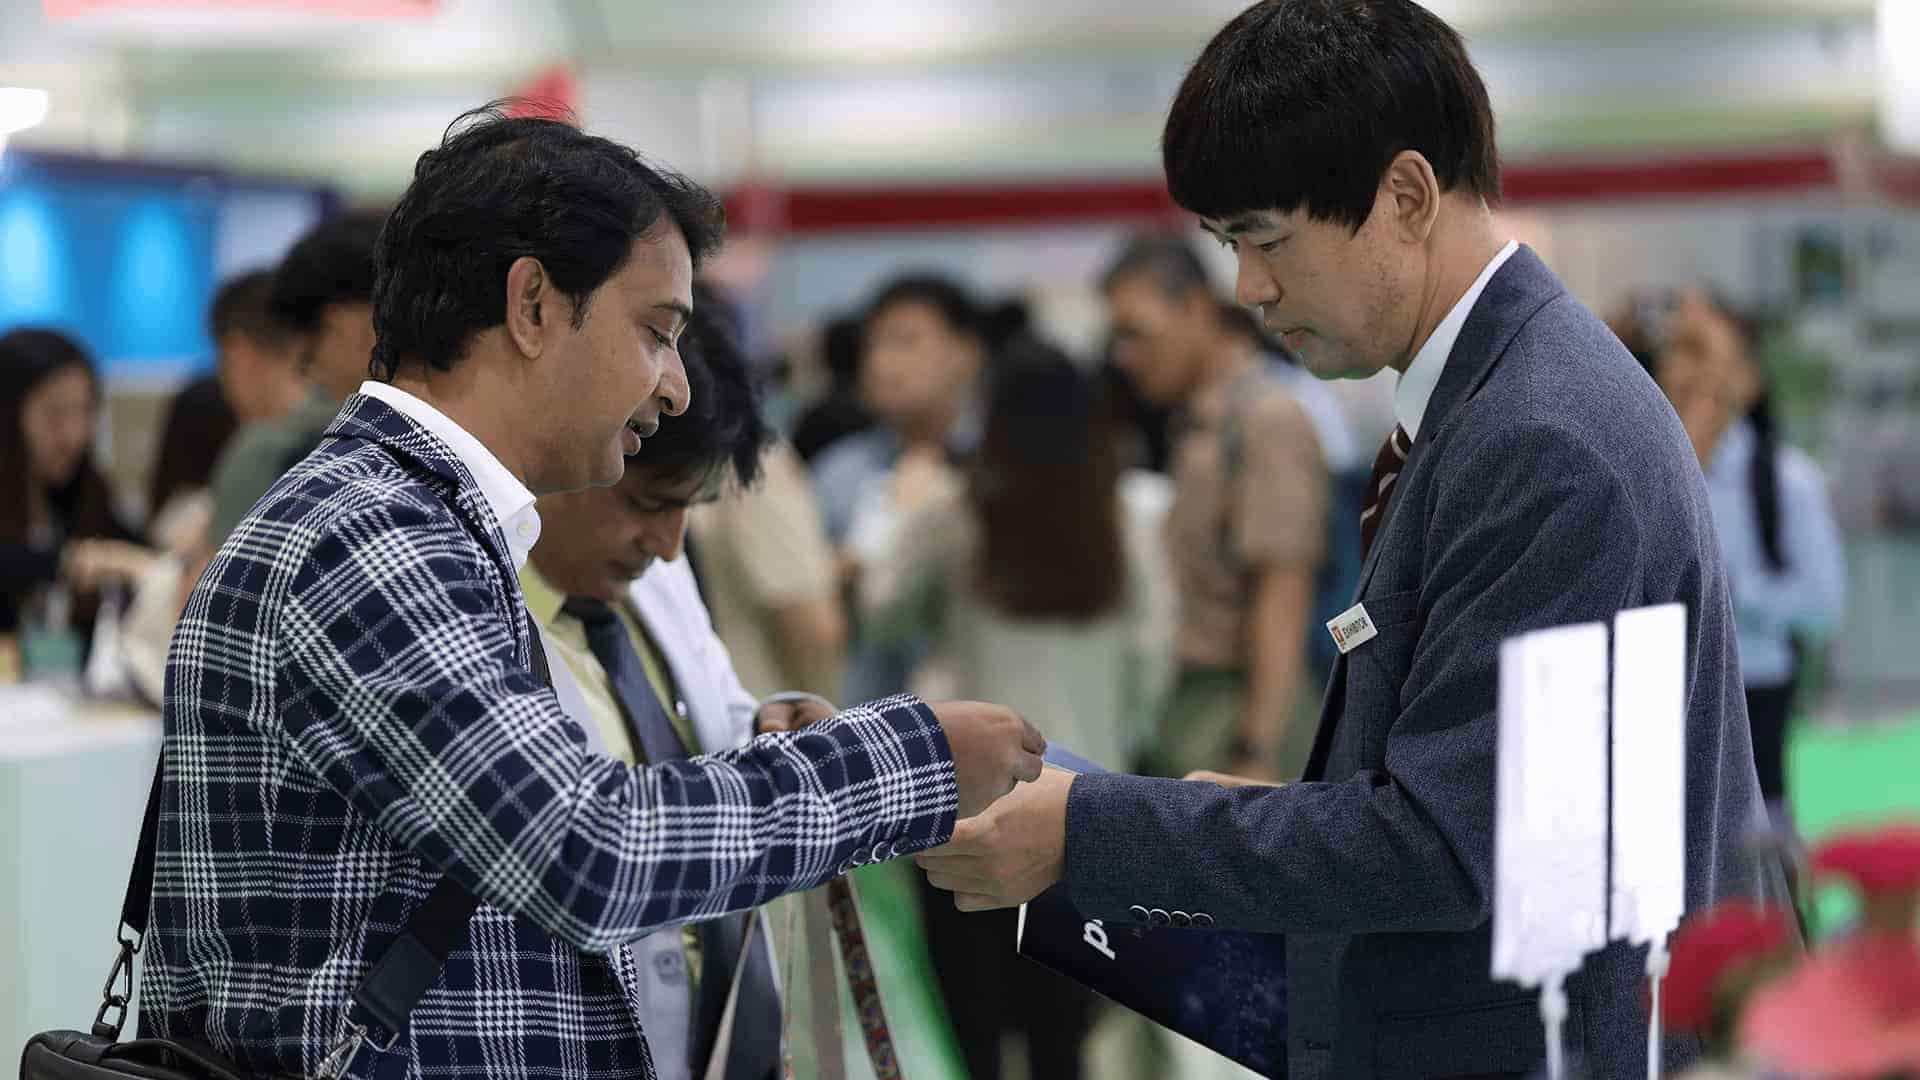 Visitor taking sample from exhibitor at Vitafoods Asia